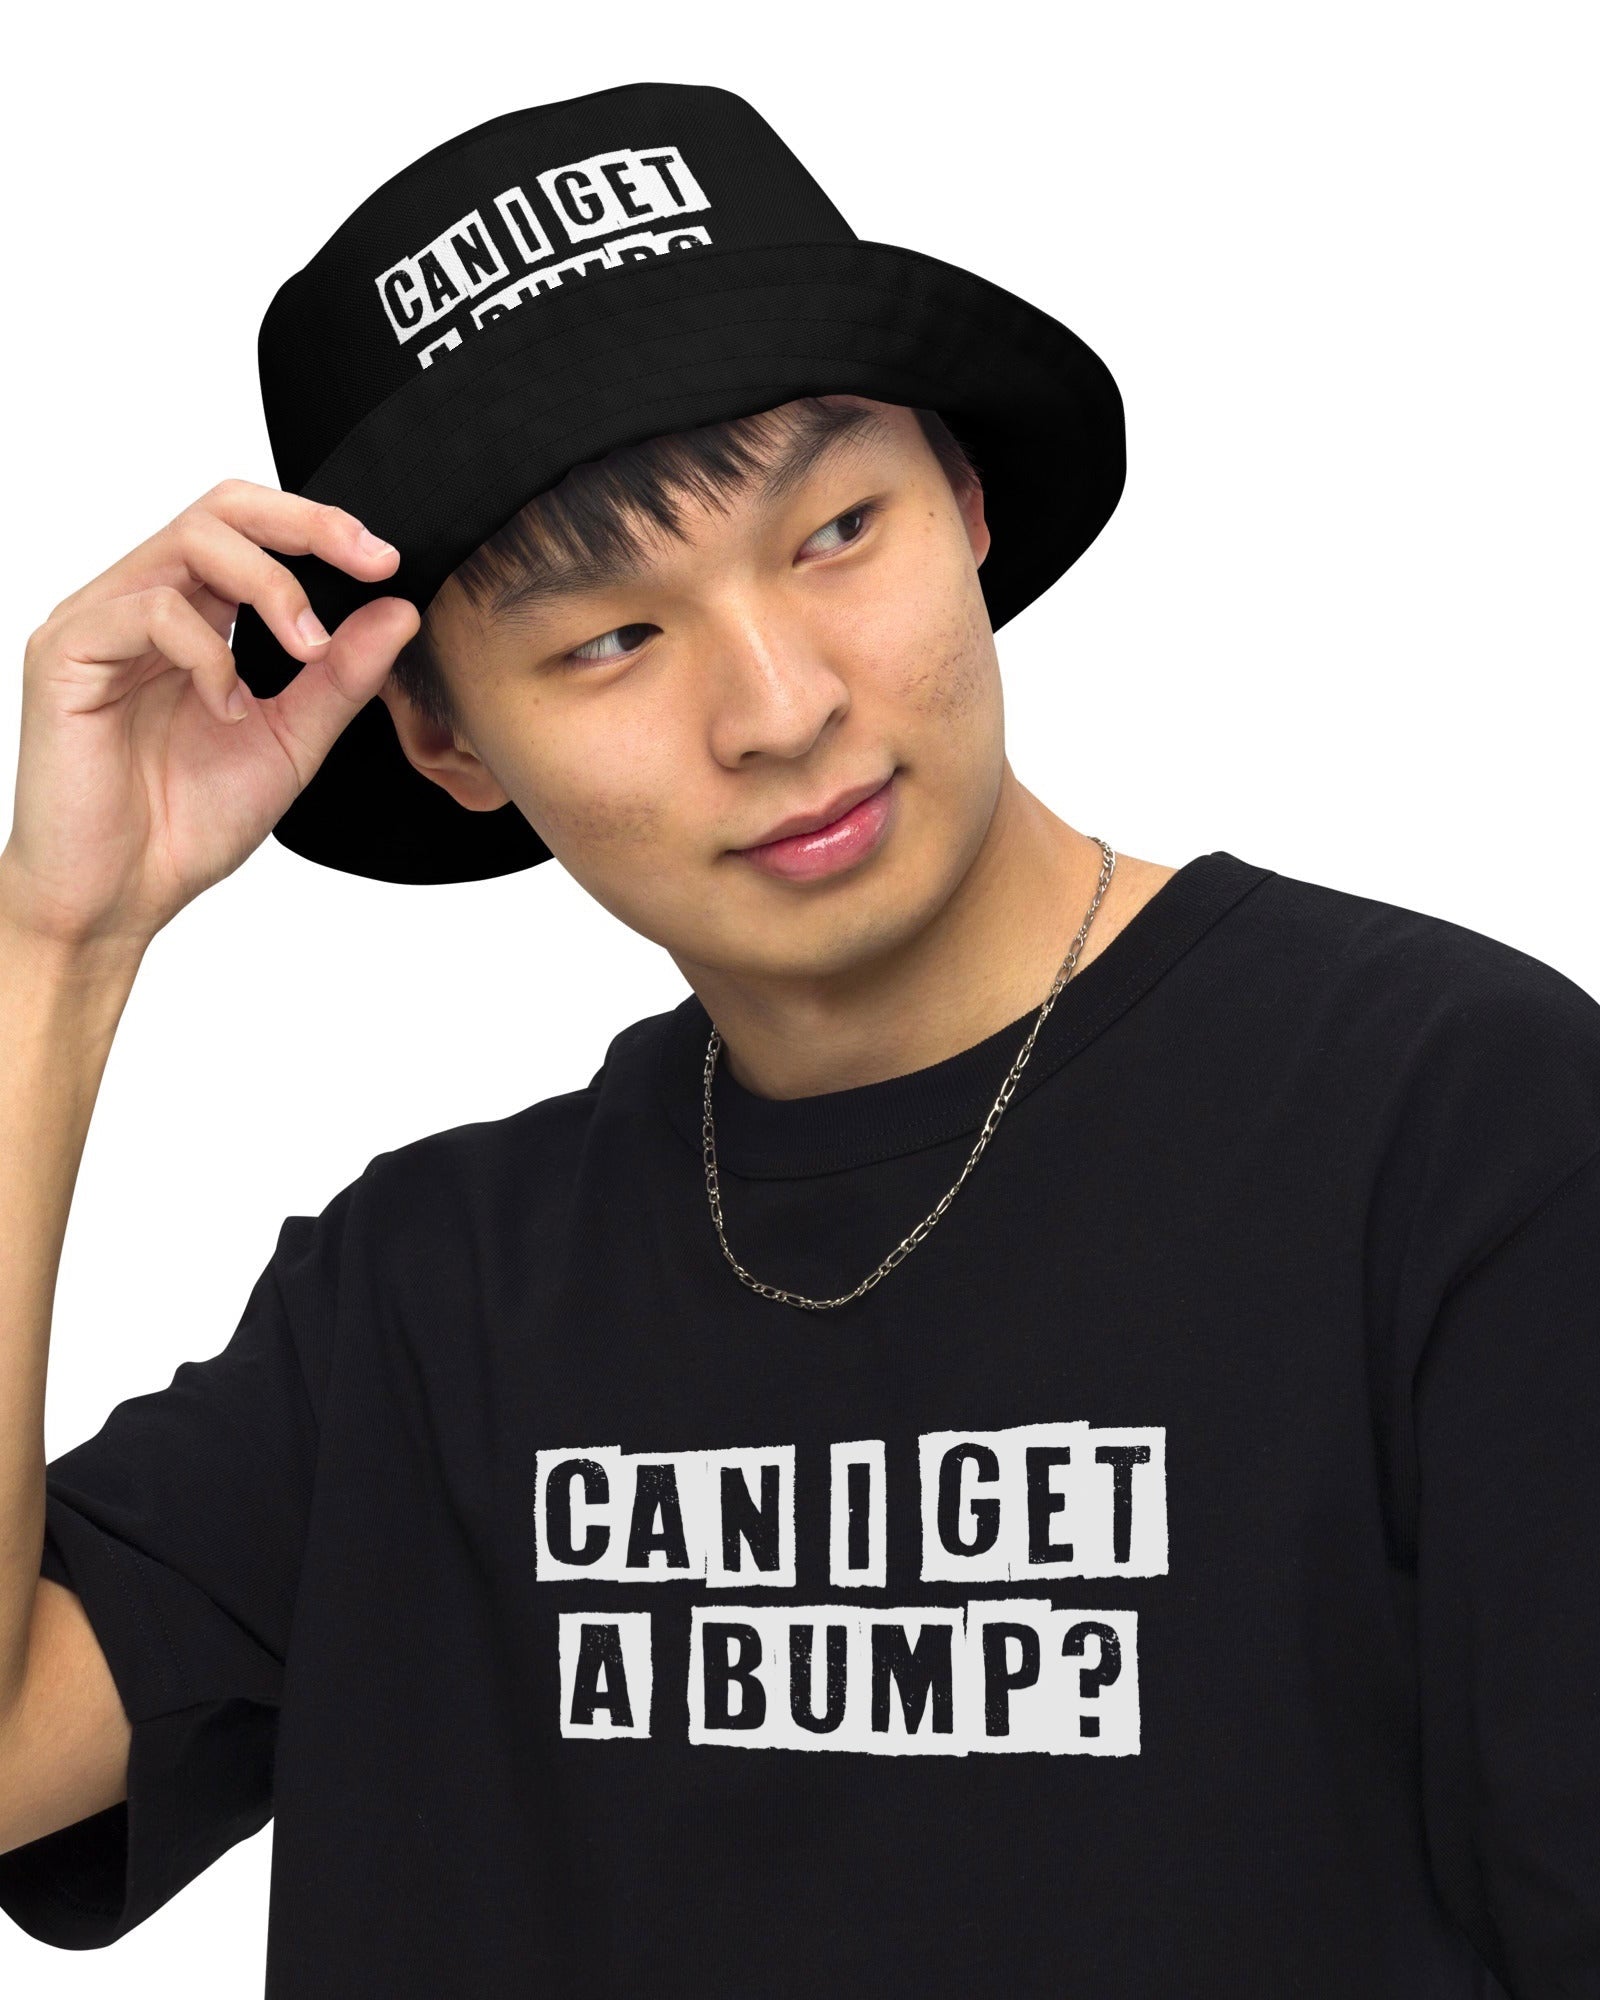 Model wearing a black bucket hat & black t-shirt with the phrase "CAN I GET A BUMP?".